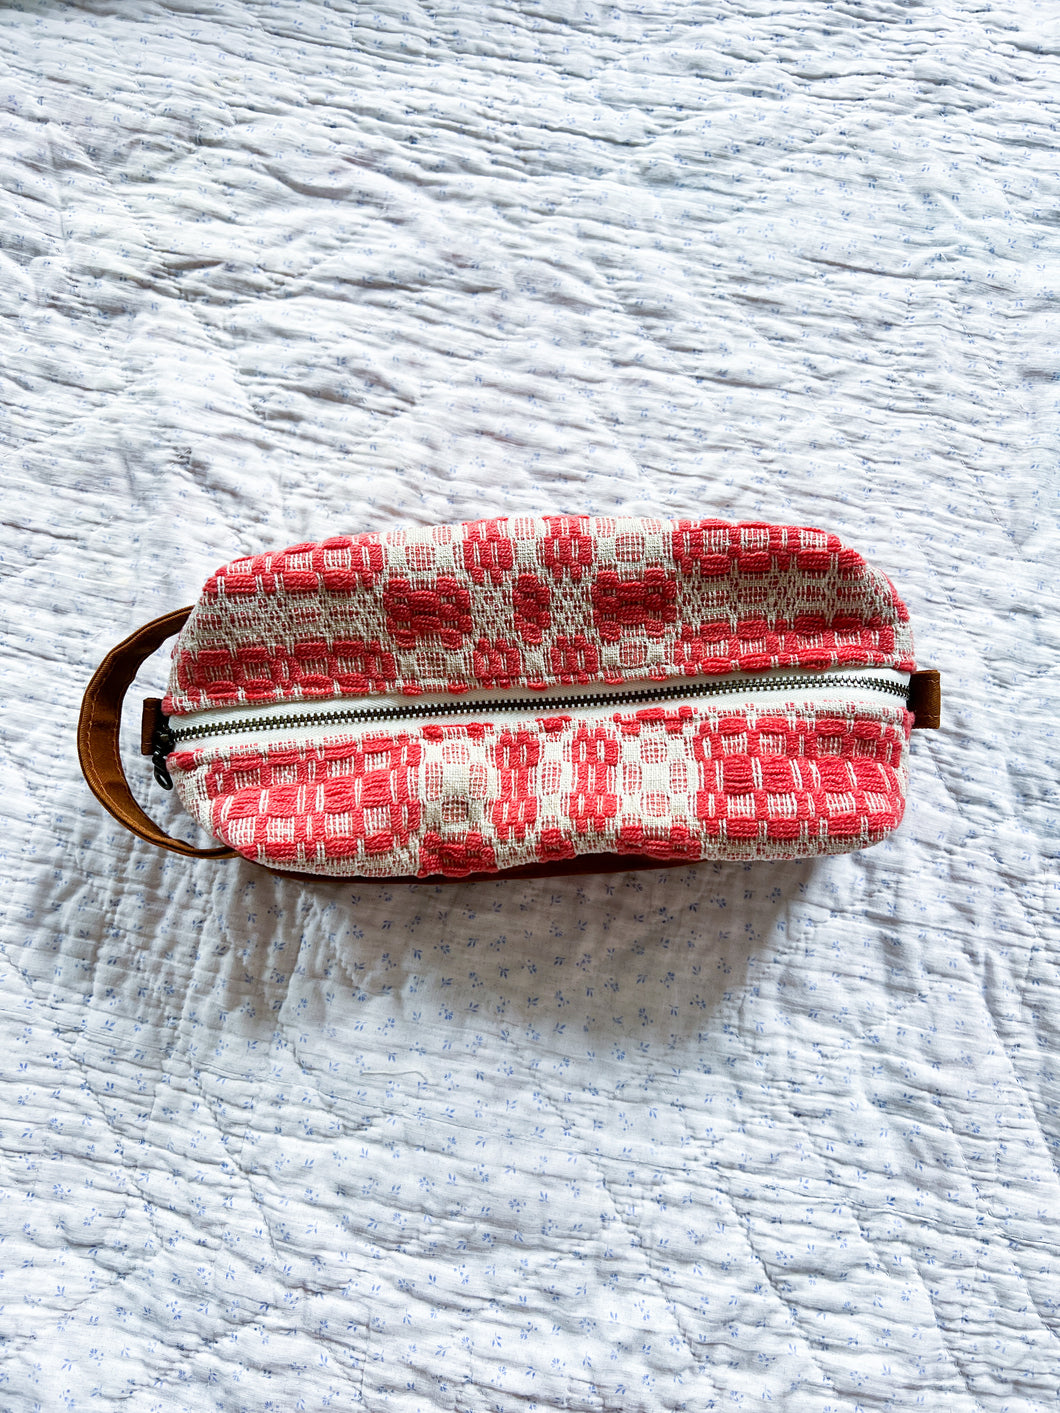 One-of-a-Kind: Coverlet Travel Pocket #5 (cotton lined)